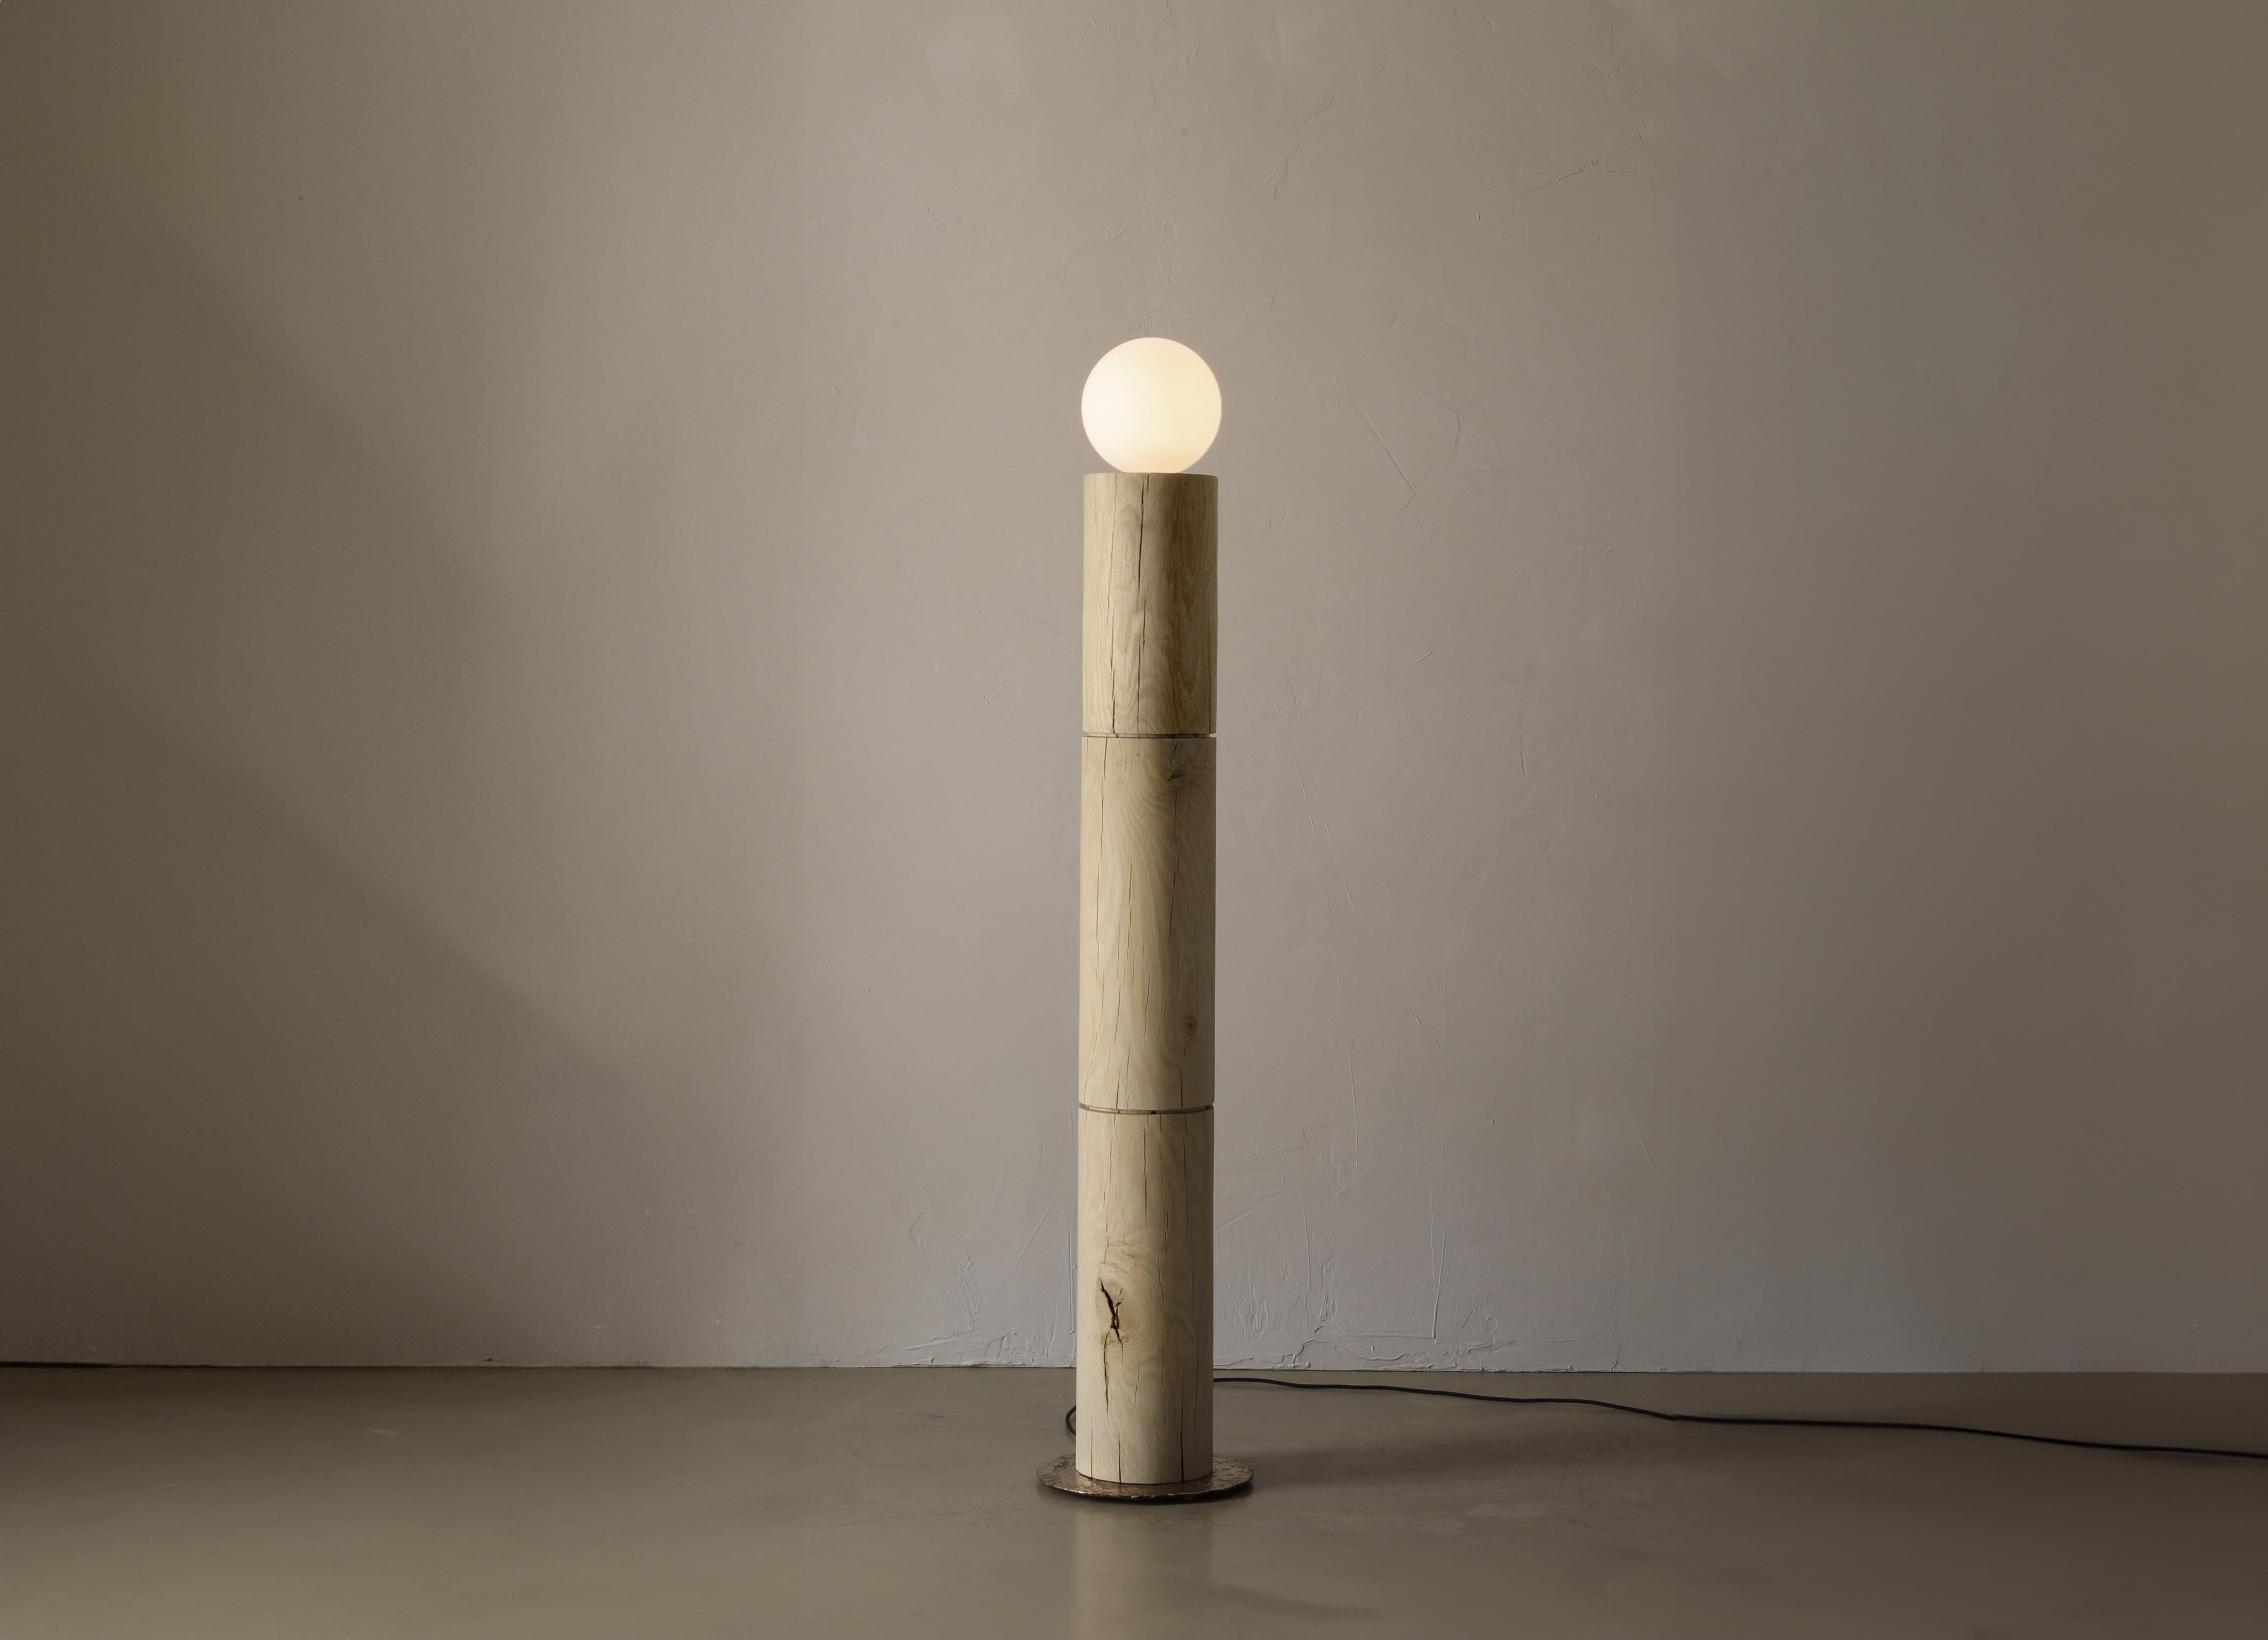 The Revolve Lamp II is a solid oak standing lamp with a large frosted globe bulb. The lamp a poured bronze plate and is switched on the cord with a dimmer.

This piece comes from the Revolve collection - Graphic forms of this pedestal-based